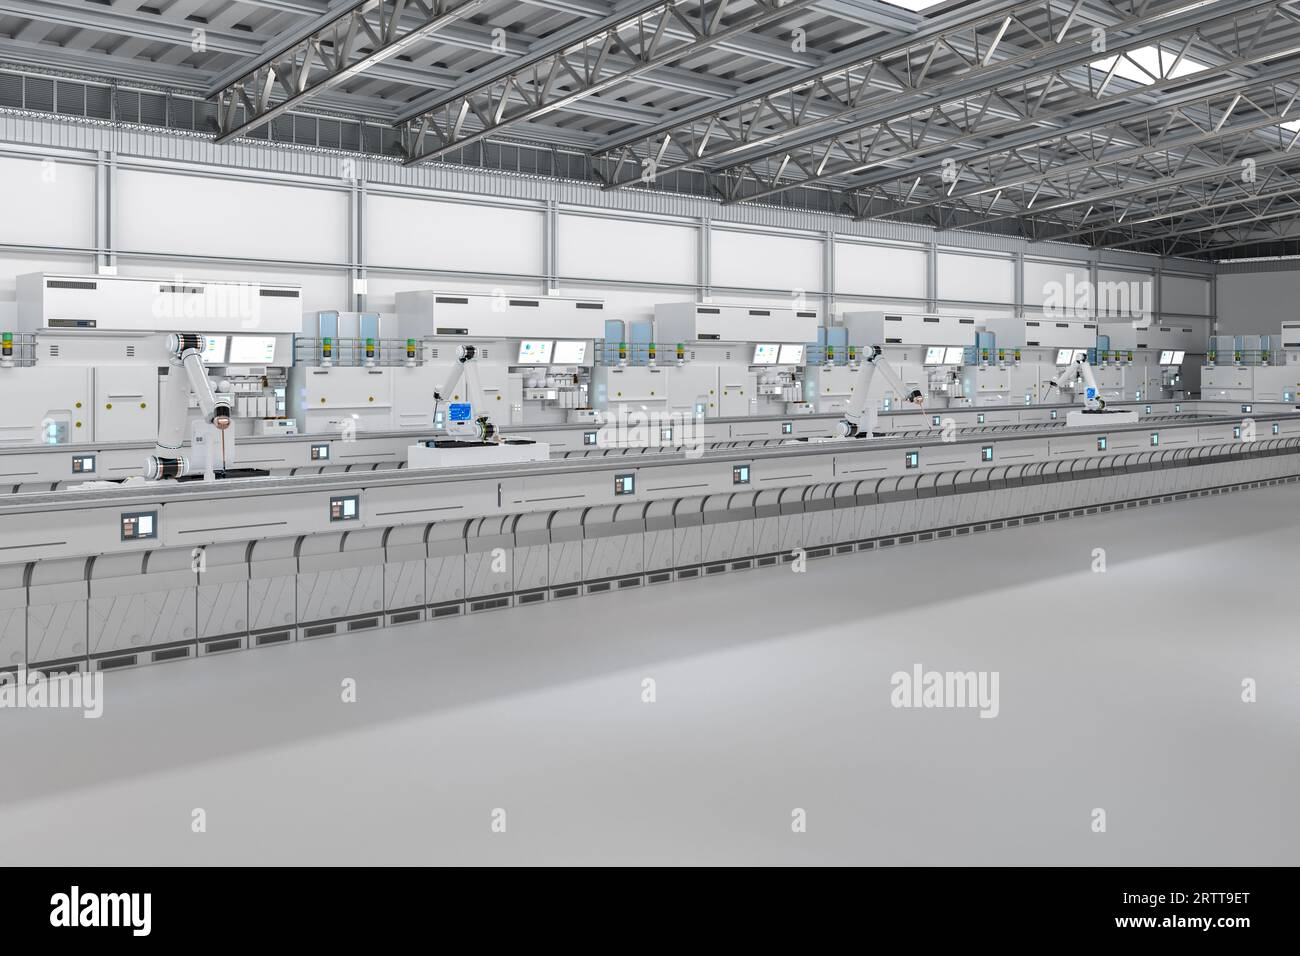 Automation industry concept with 3d rendering robot assembly line in  factory Stock Photo